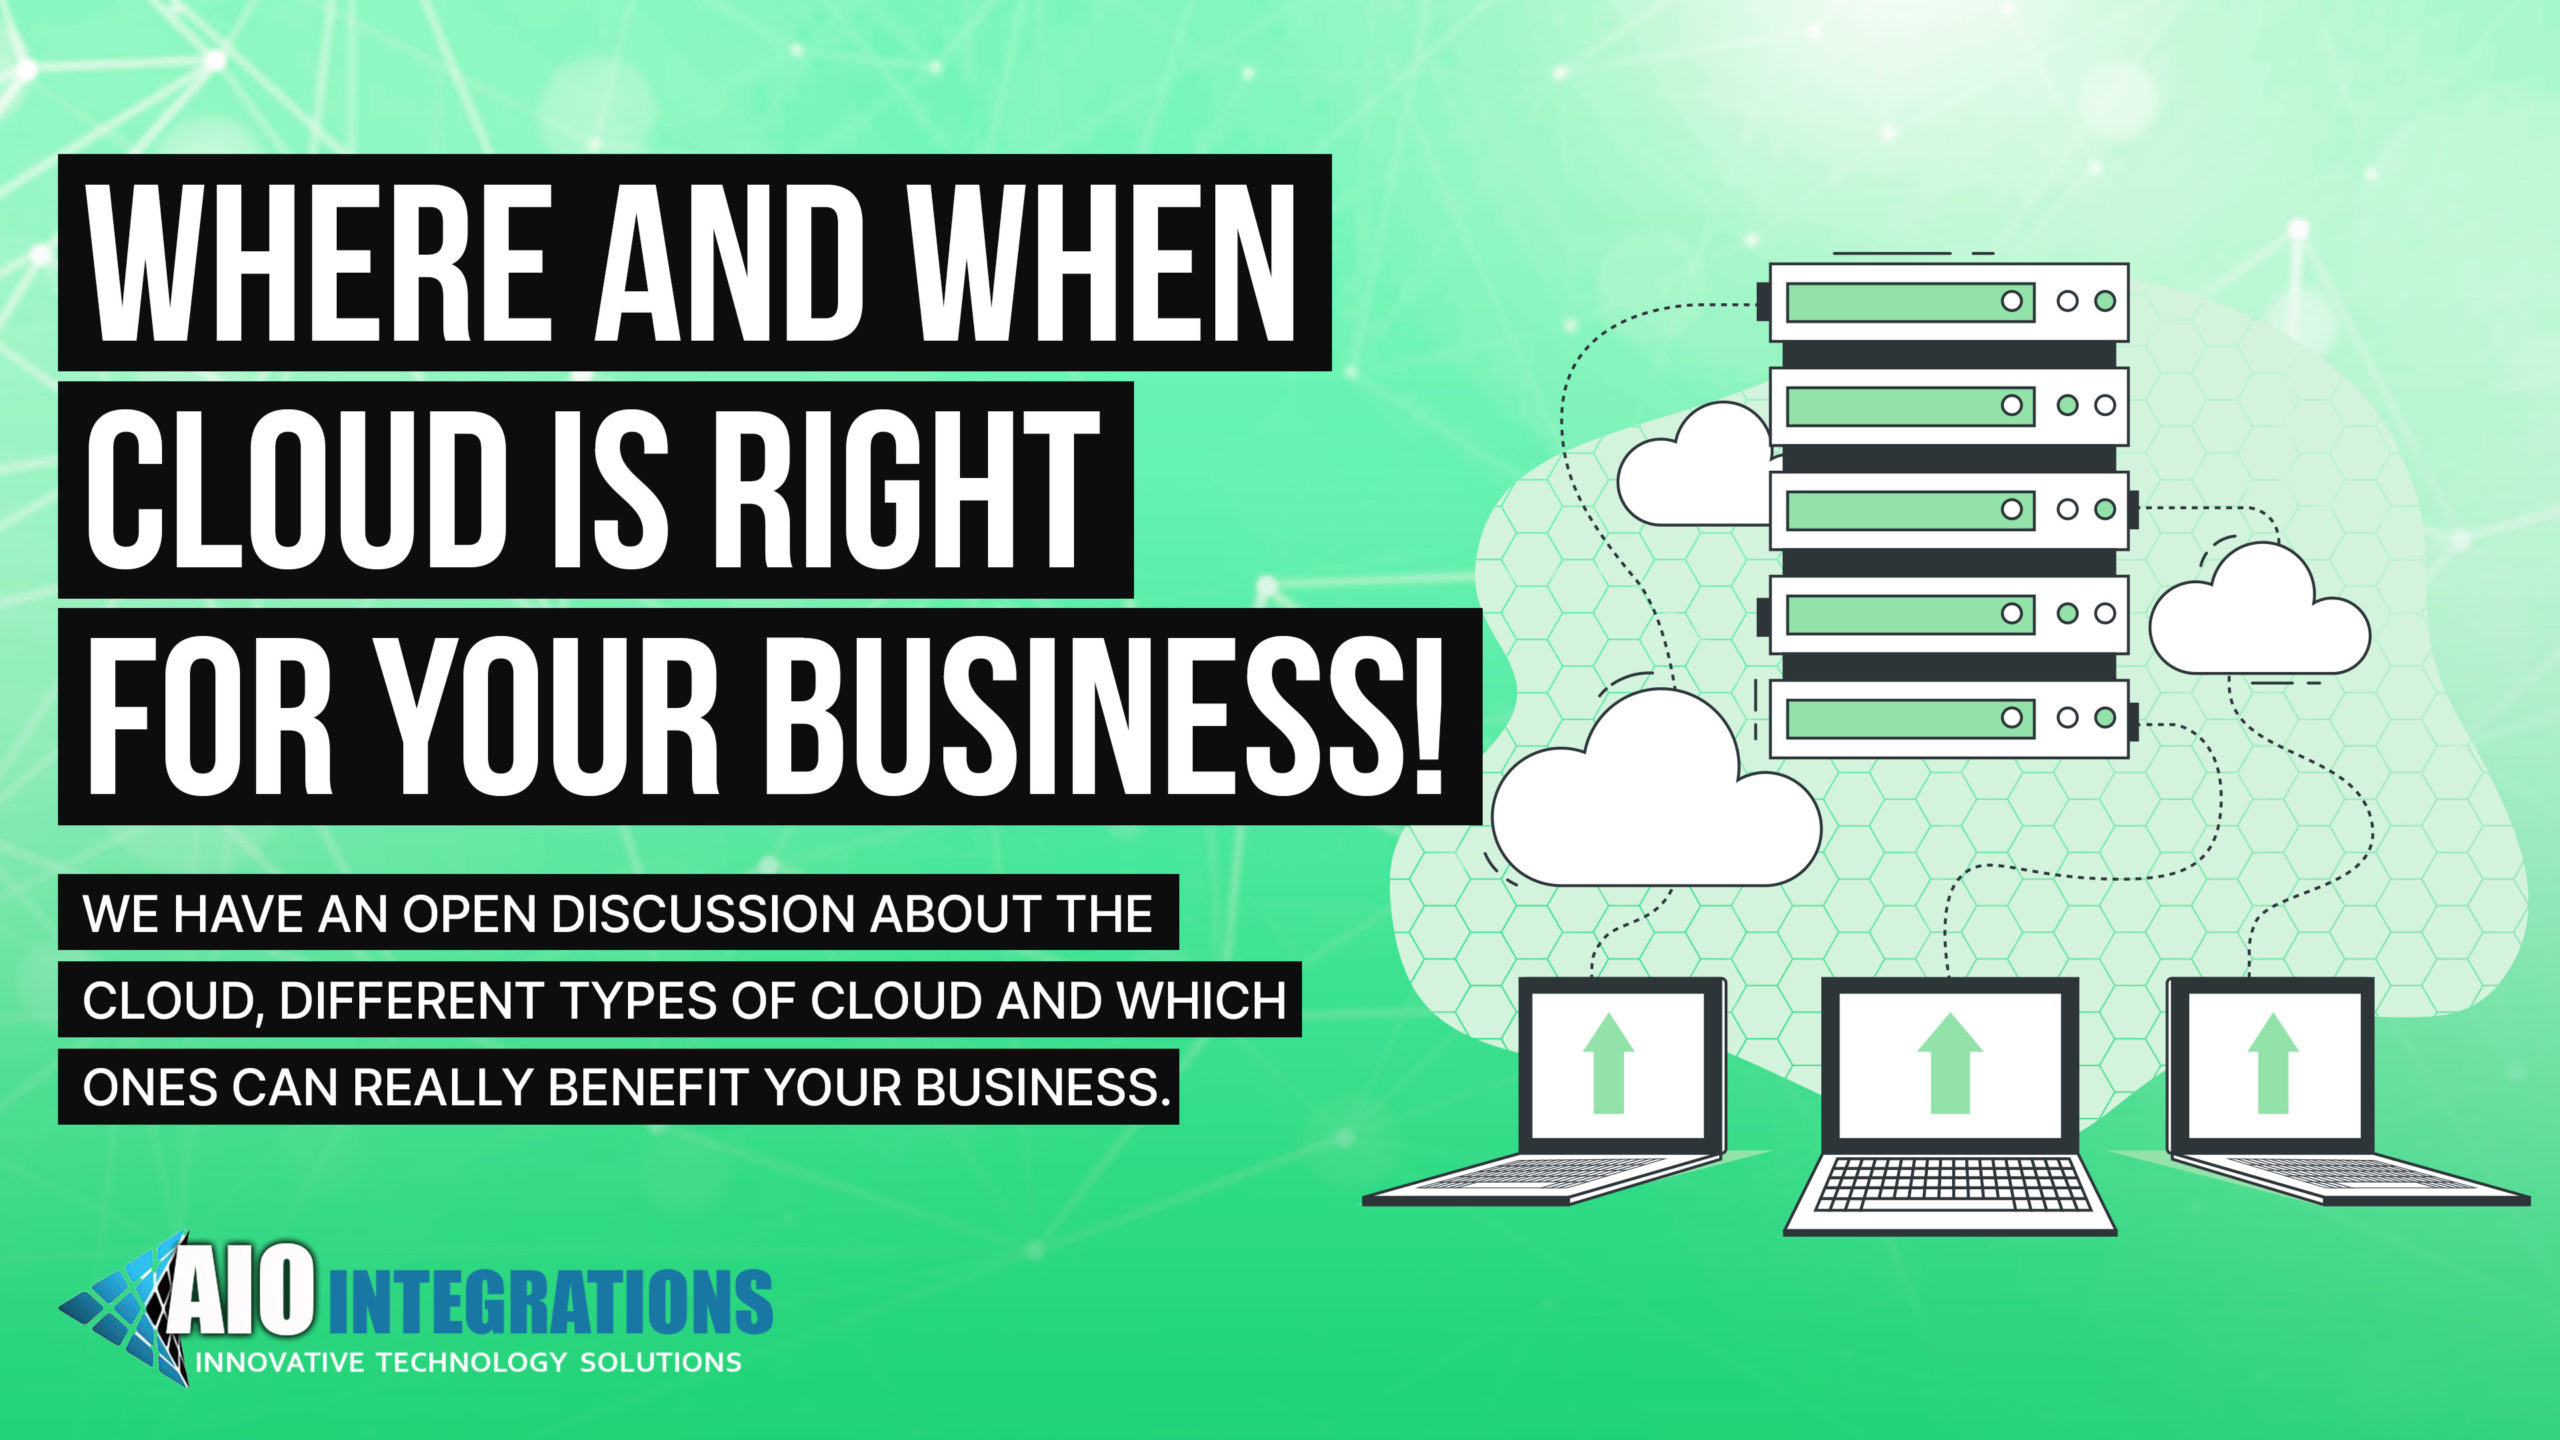 AIO Integrations: Where & When The Cloud Is Right For Your Business